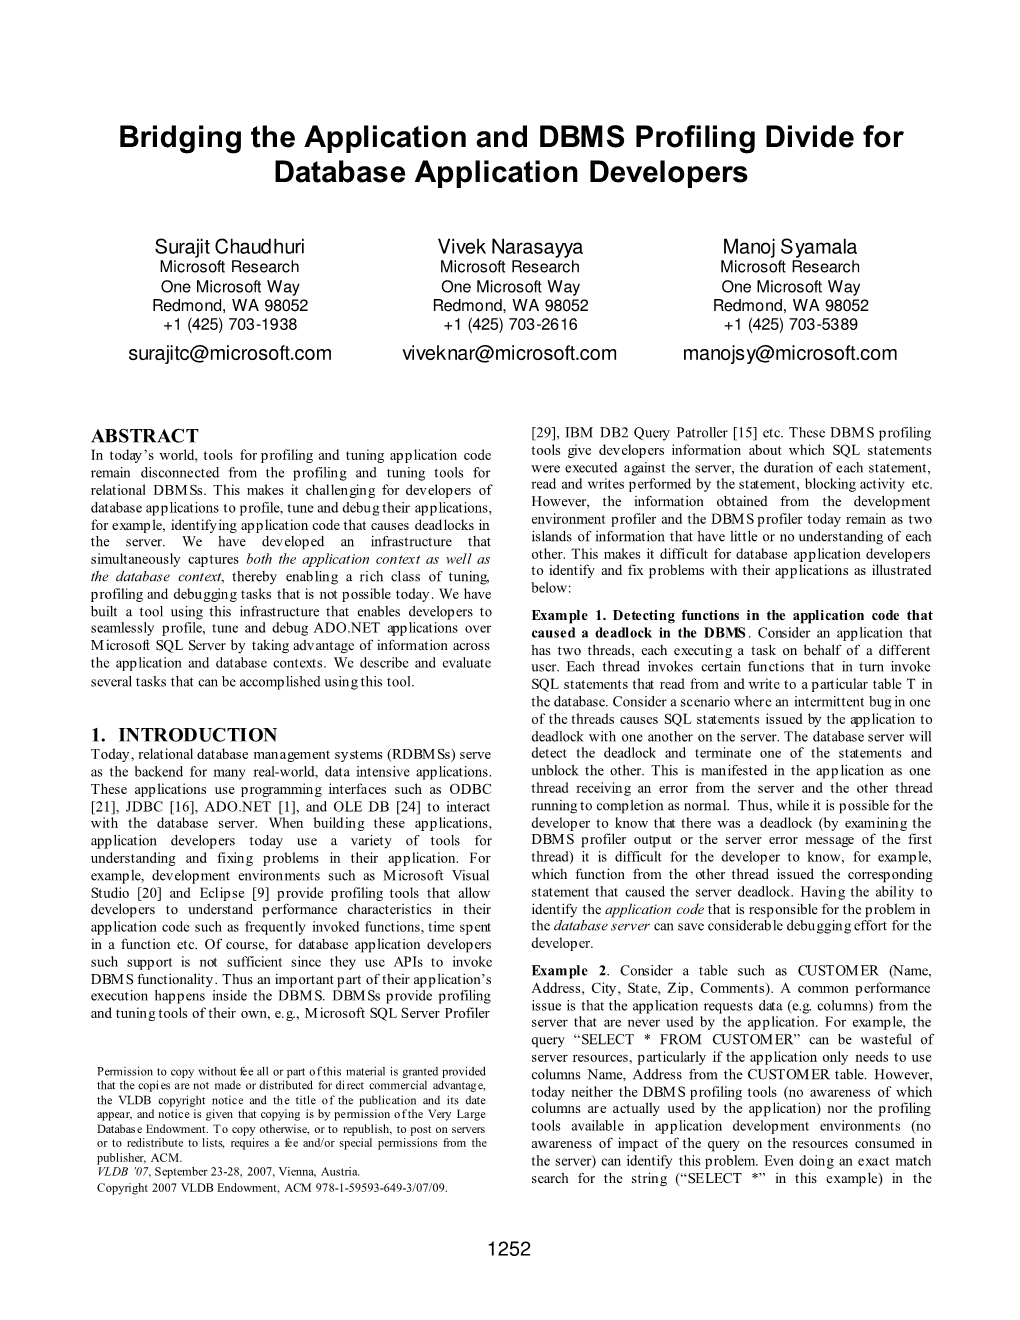 Bridging the Application and DBMS Profiling Divide for Database Application Developers